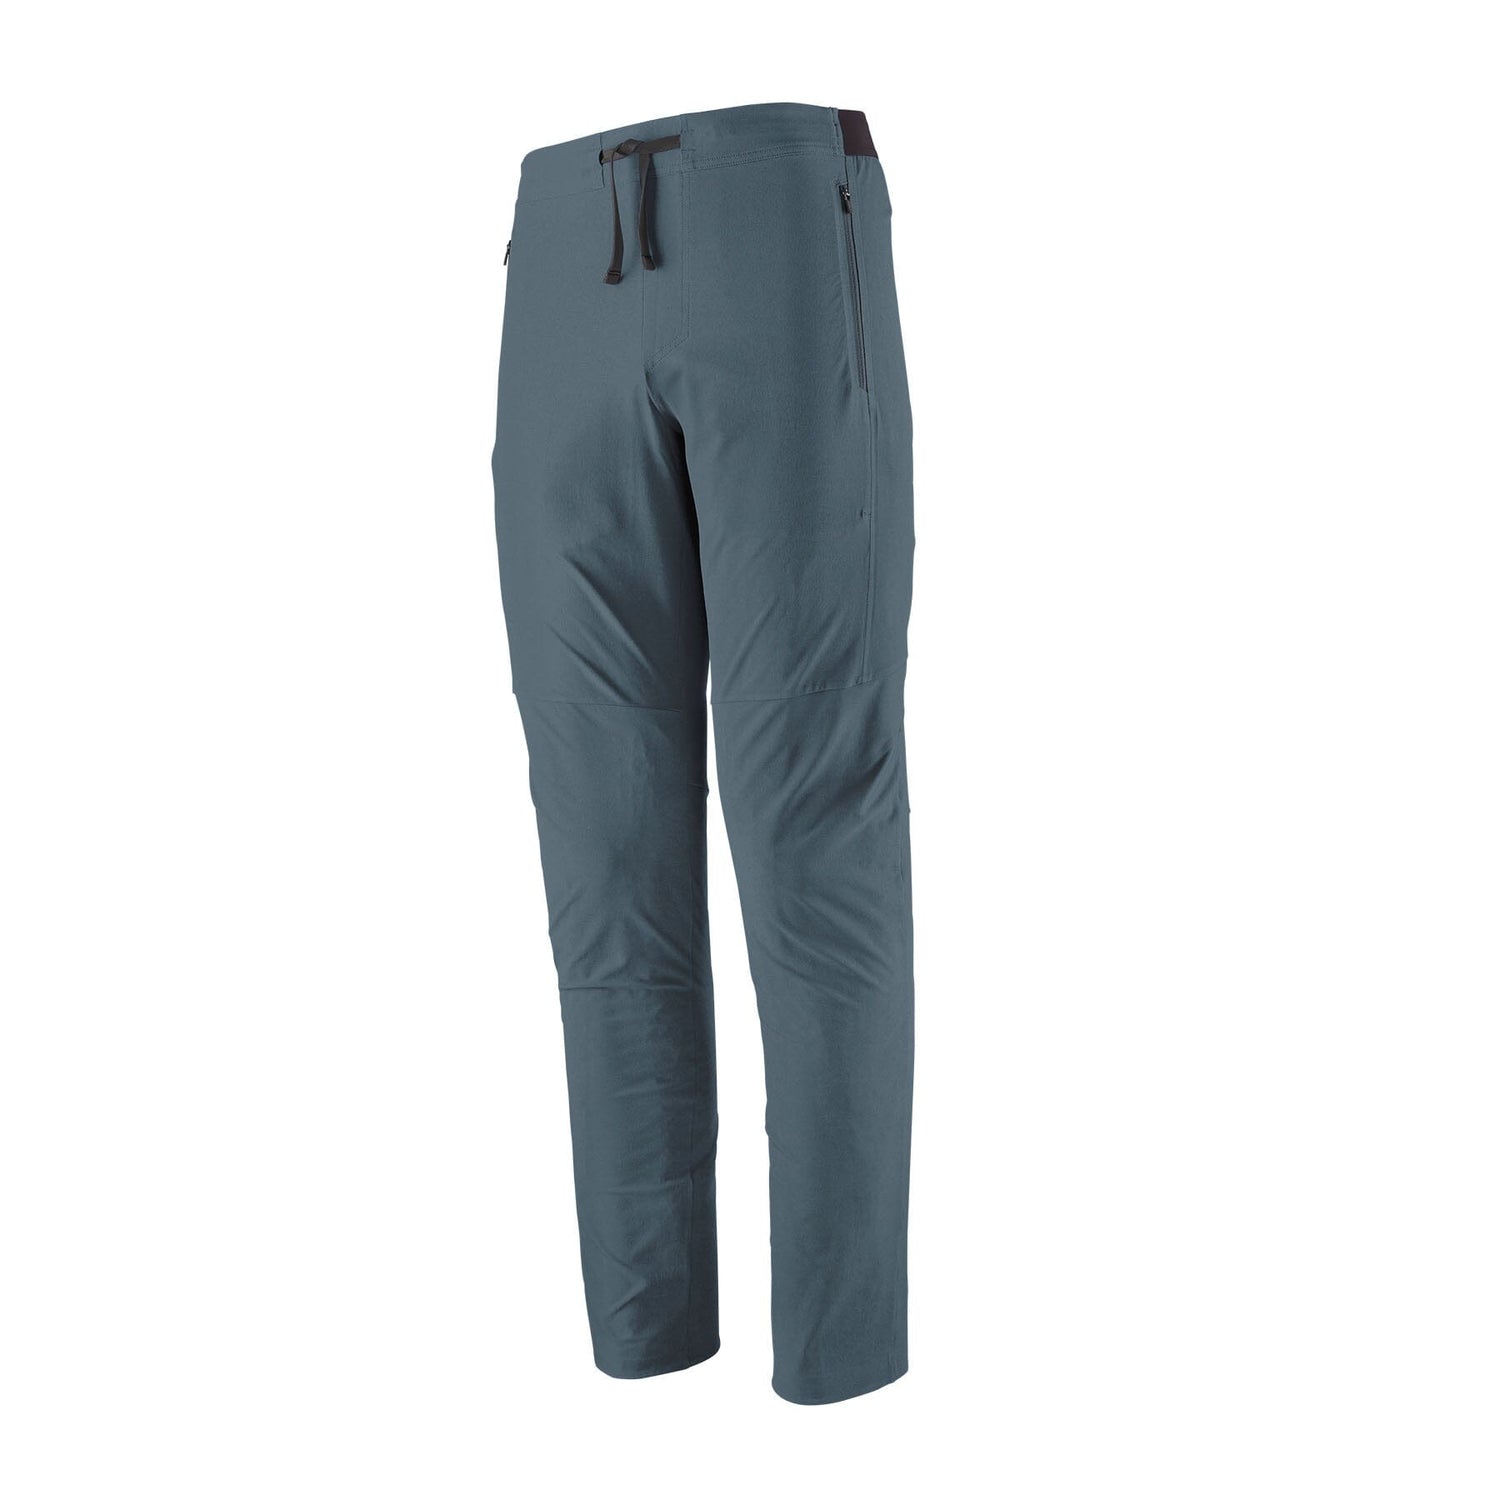 Patagonia M's Altvia Light Alpine Pants - Recycled Polyester Plume Grey Pants